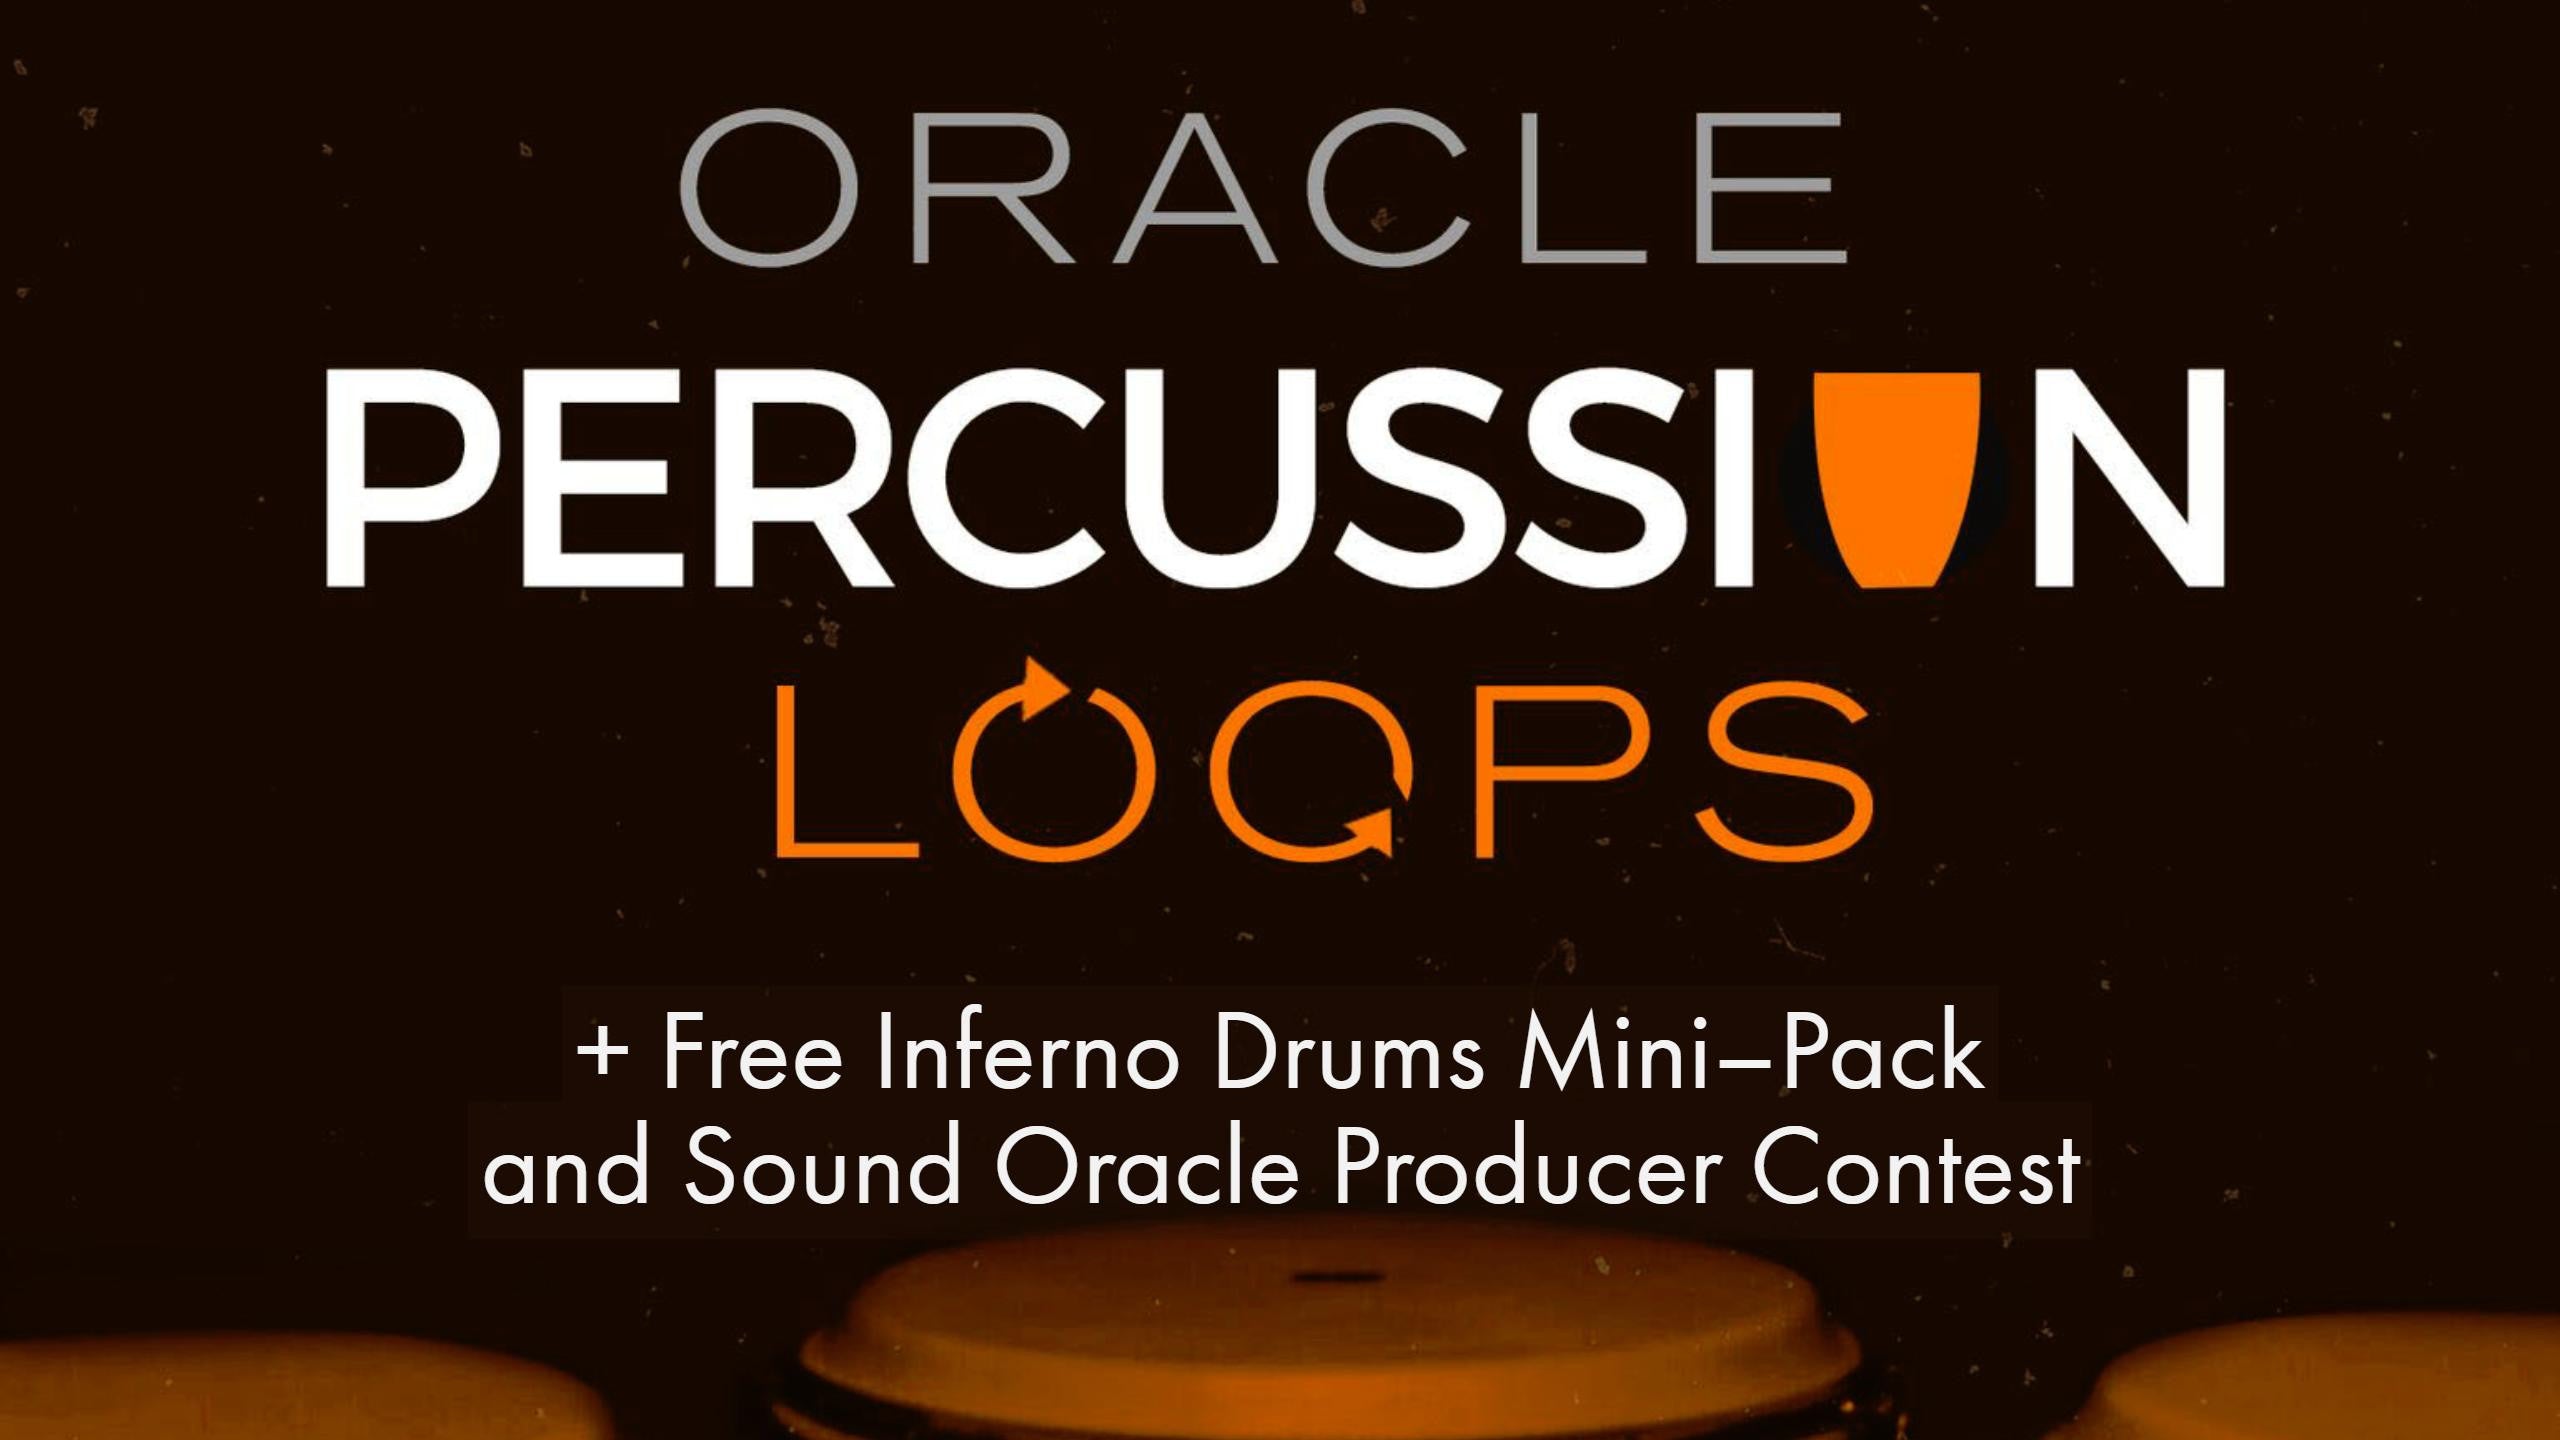 (Press Release) New Sound Library: Oracle Percussion Loops & 1 Free Drum Kit